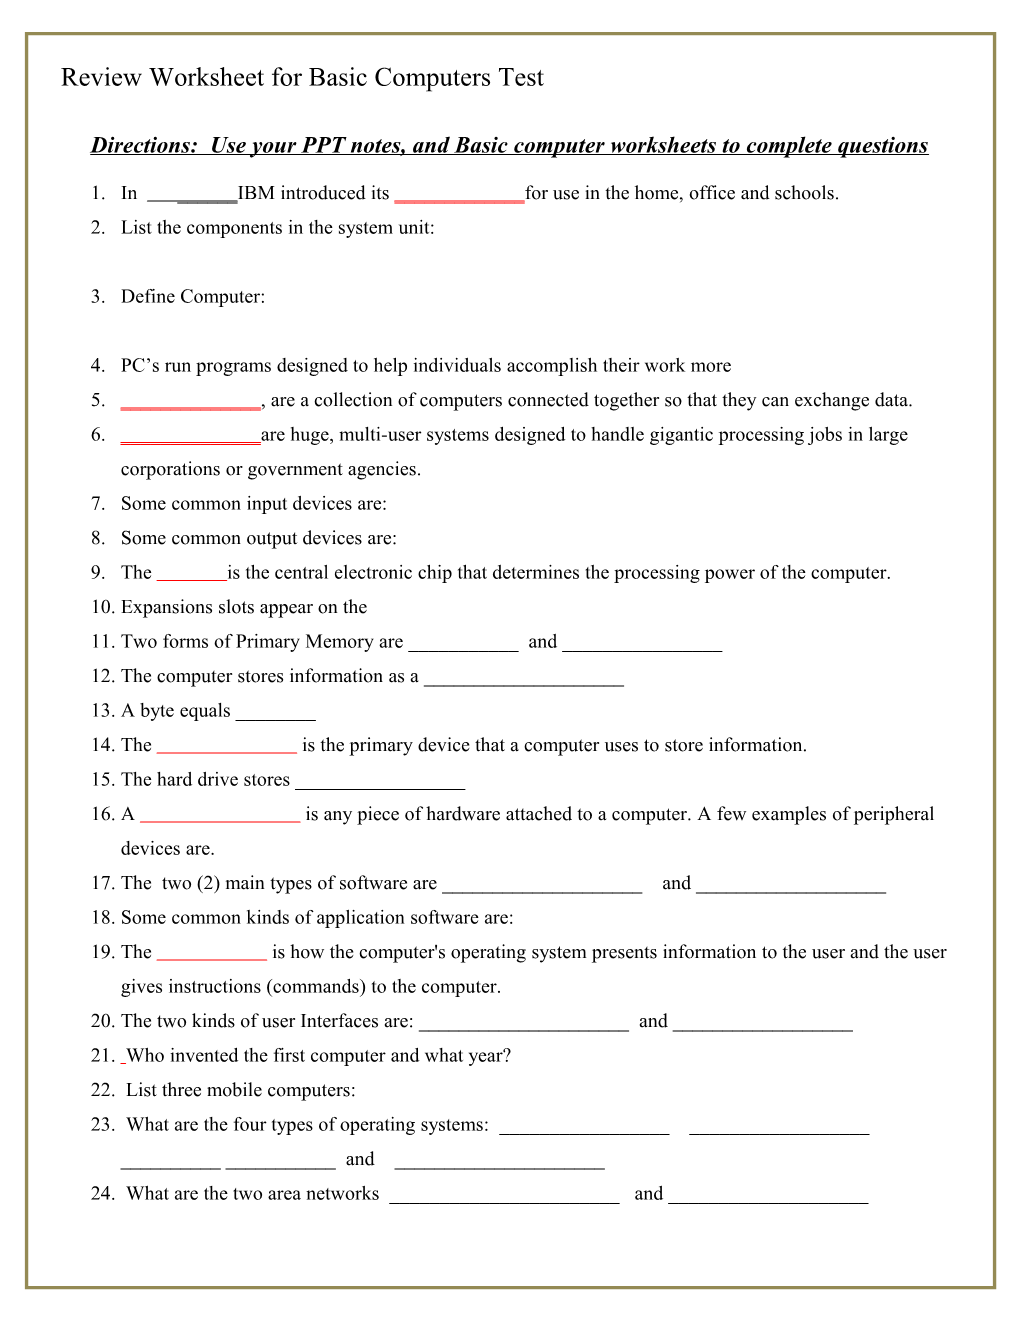 Review Worksheet for Basic Computers Test